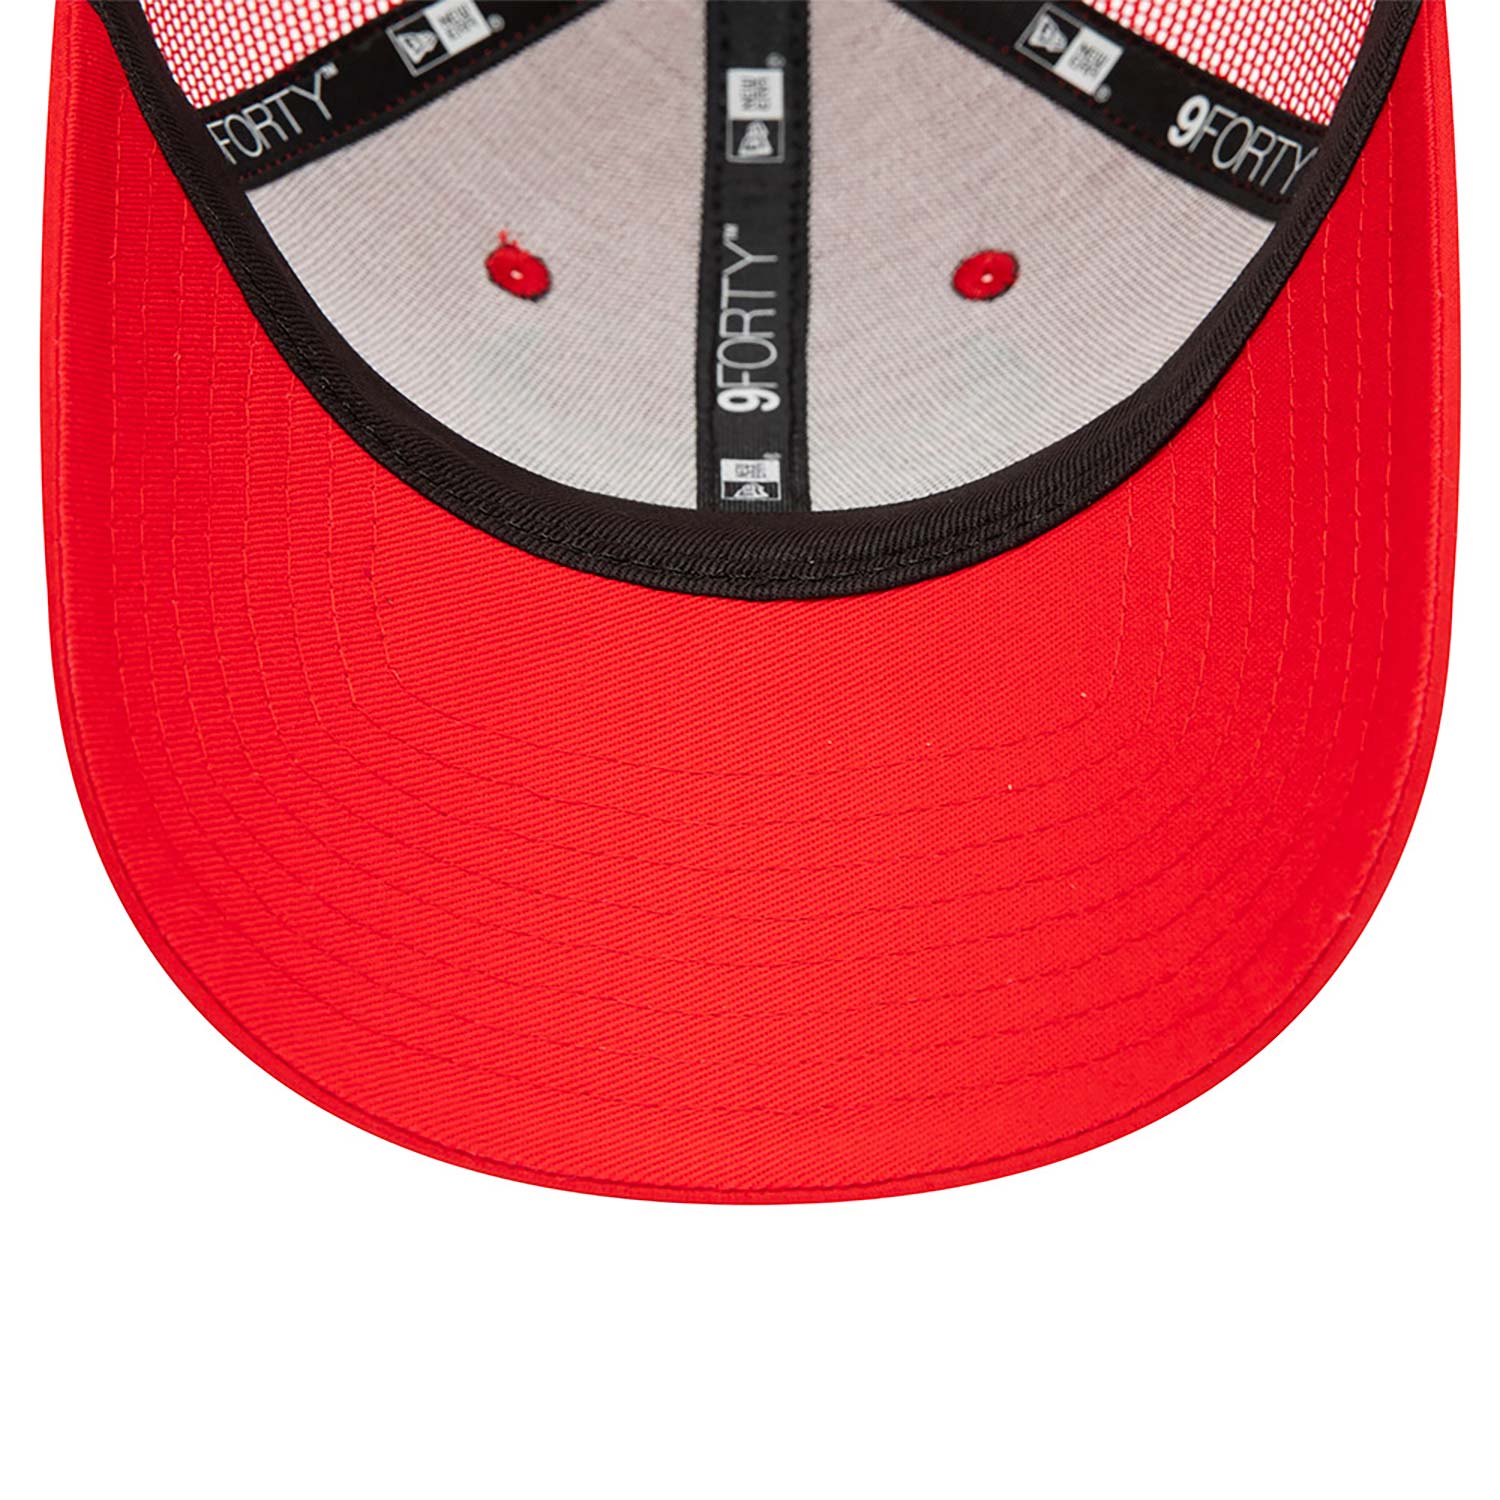 Home Field Chicago Bulls Red 9FORTY Trucker Cap